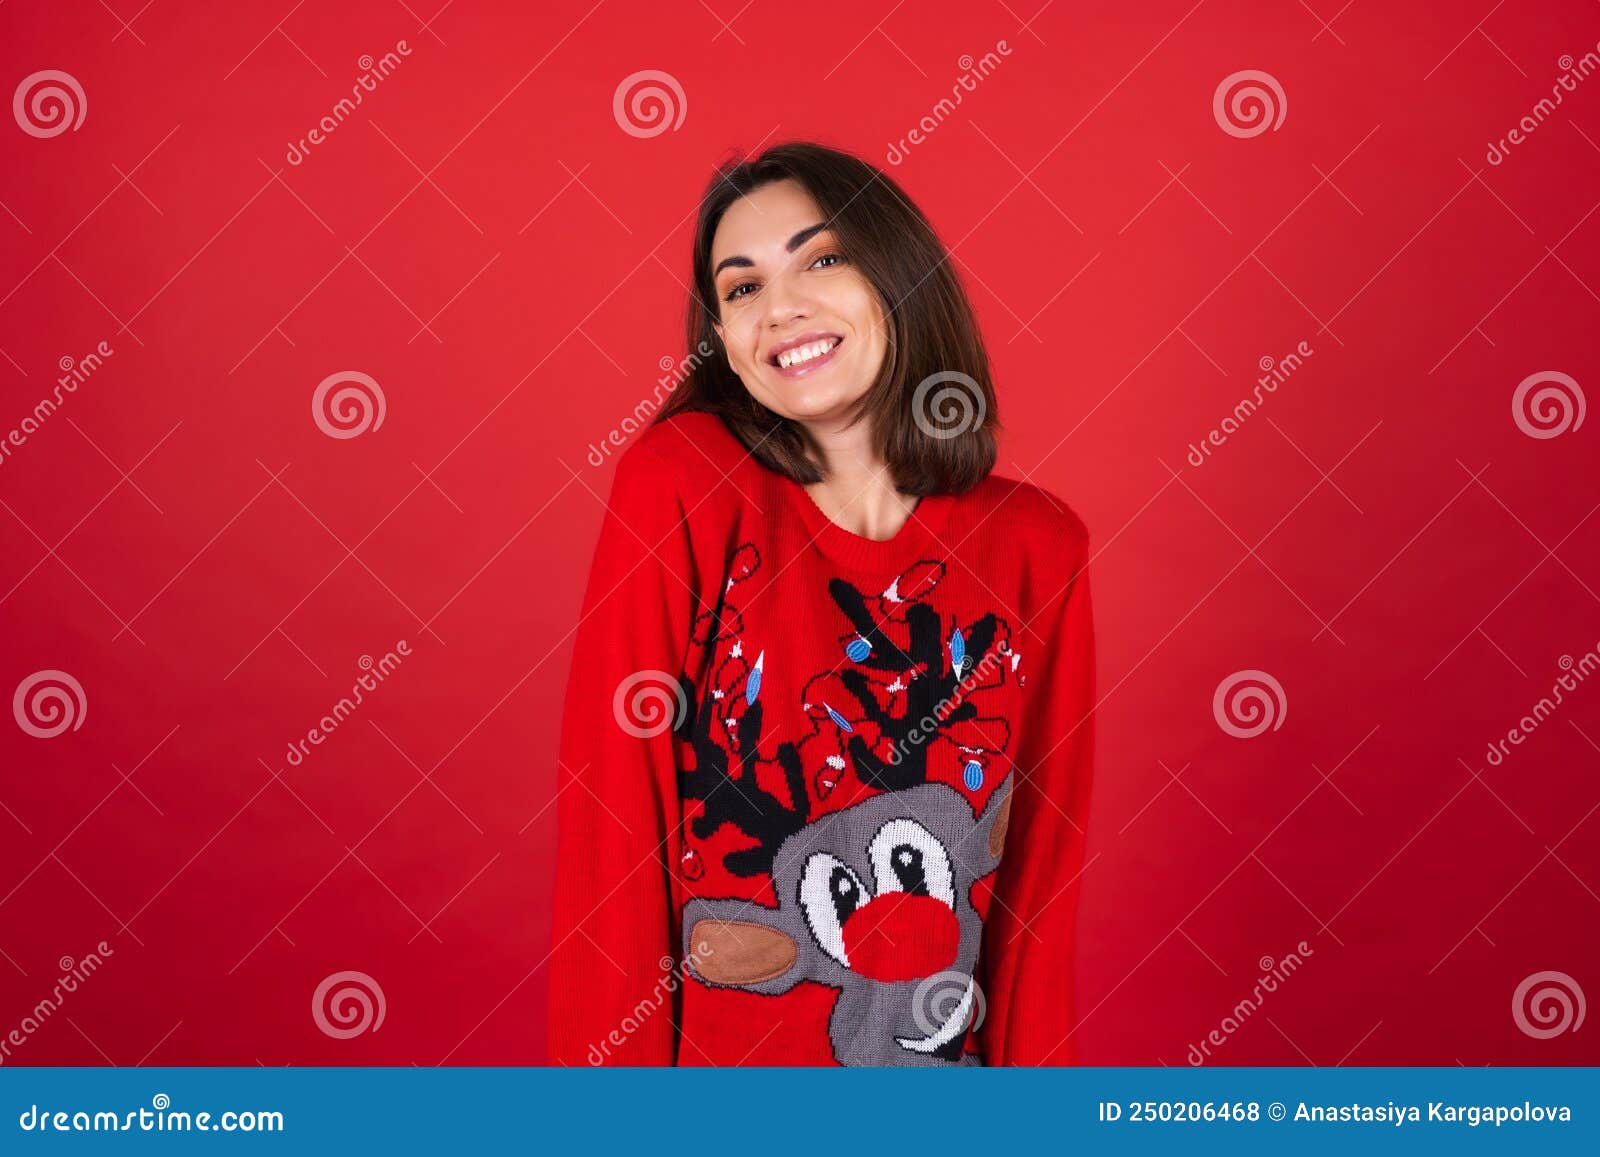 young woman in a christmas sweater on a red background